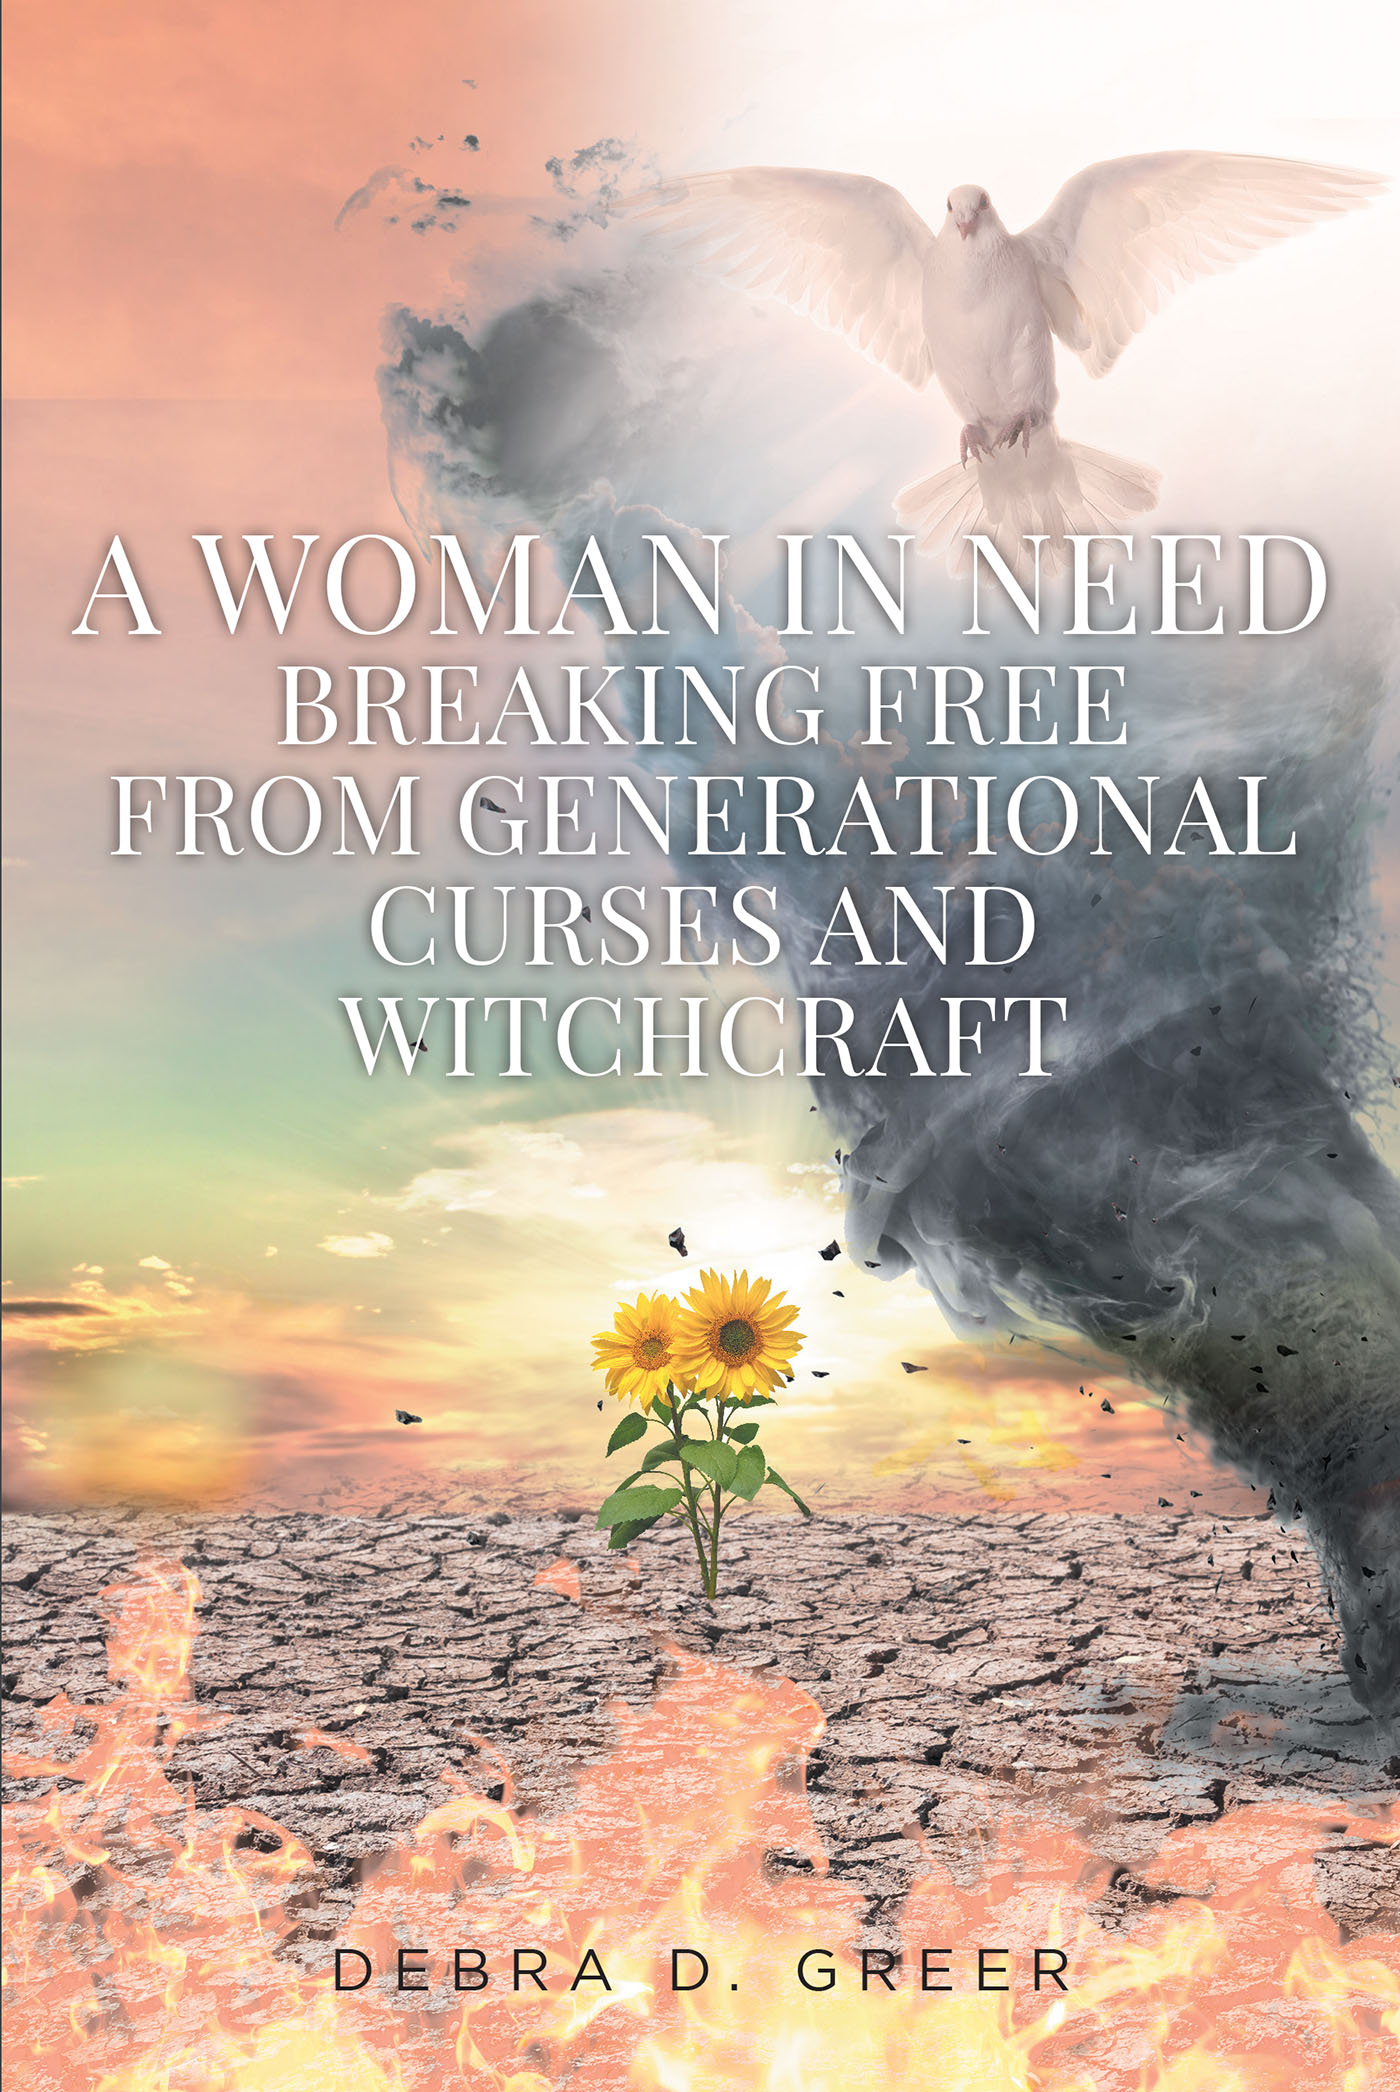 Debra D. Greer’s New Book, “A Woman in Need Breaking Free from Generational Curses and Witchcraft,” Reveals How the Author Came to Know Christ and Free Herself of Sin